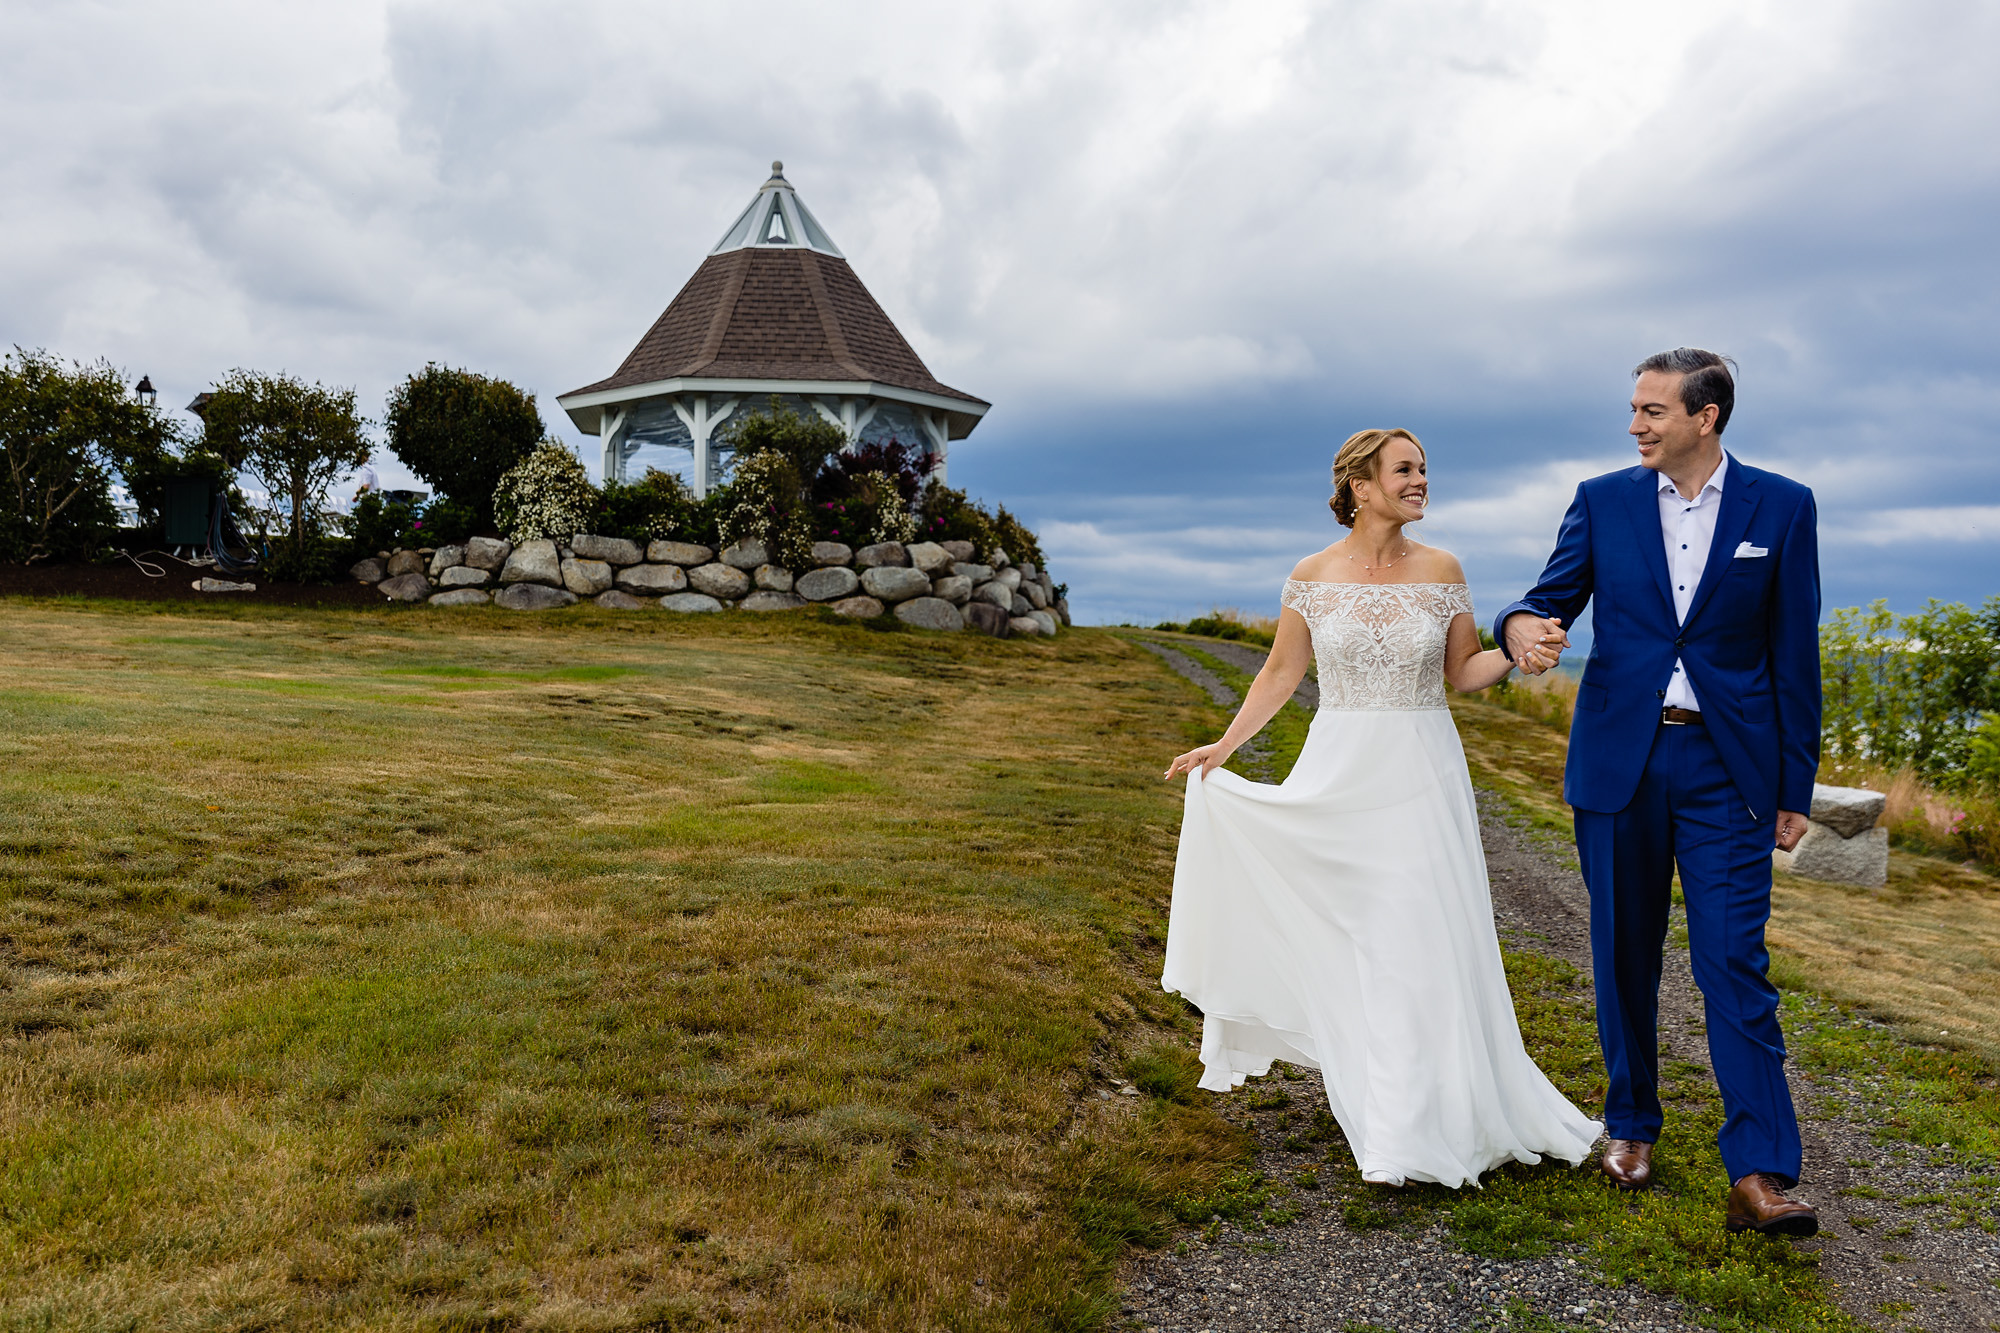 The first look at a French's Point wedding in Maine